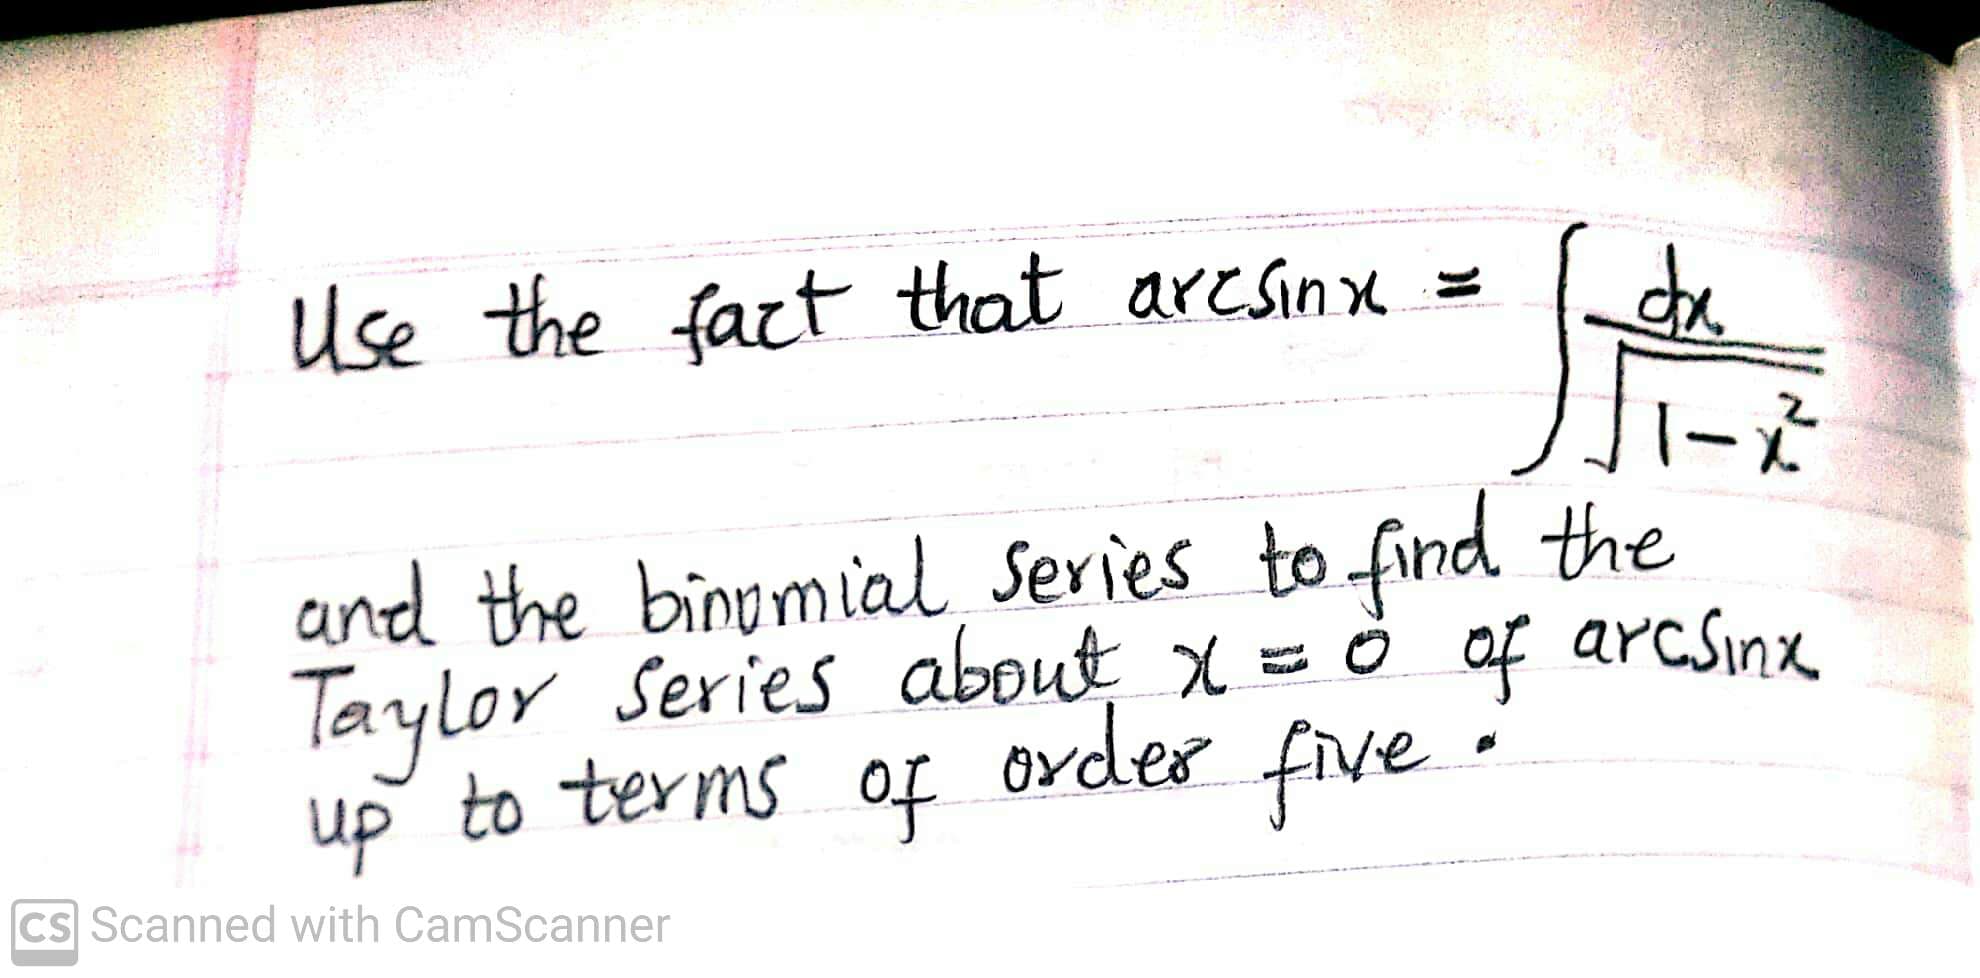 Use the fact that aresinx =
1-ズ
and the binomial Series to find the
Taylor Series about x = ở af arcsinx
up to terms of
order
five-
